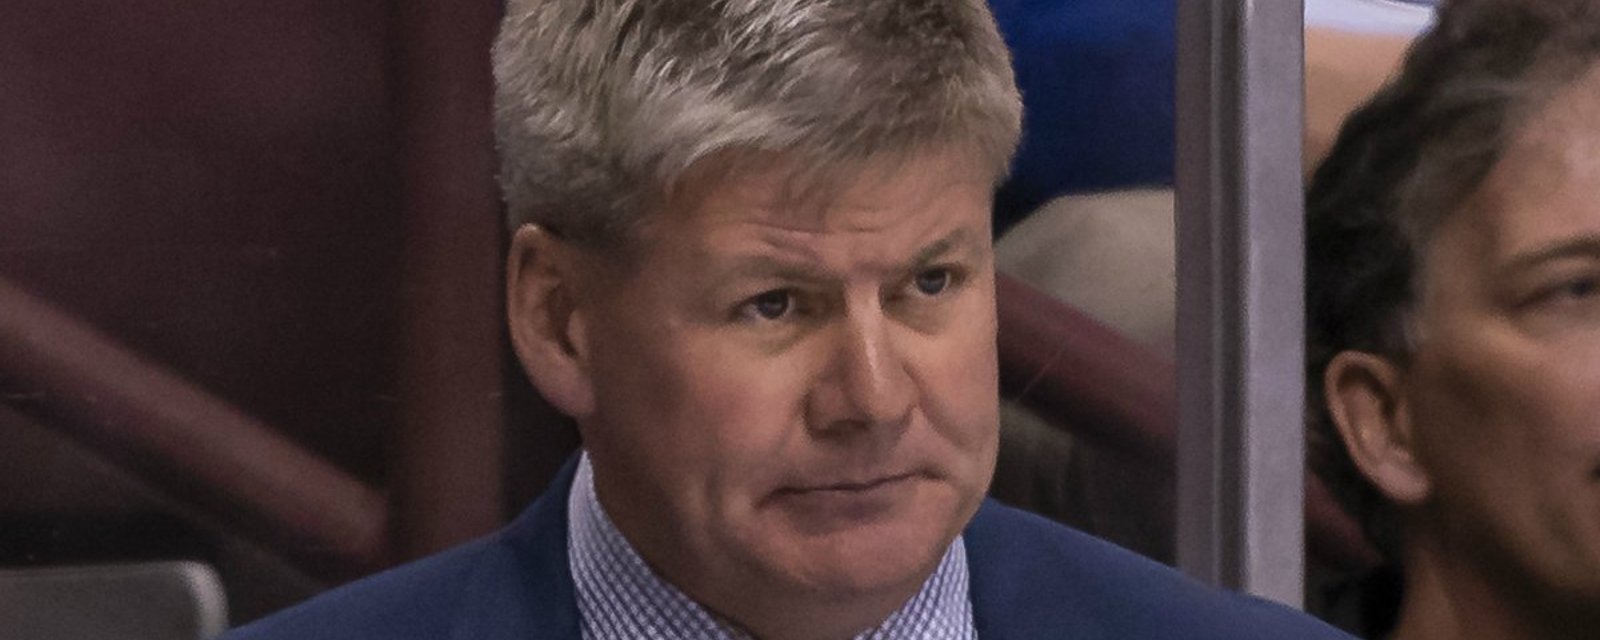 Bill Peters in fact resigns from his position as head coach 